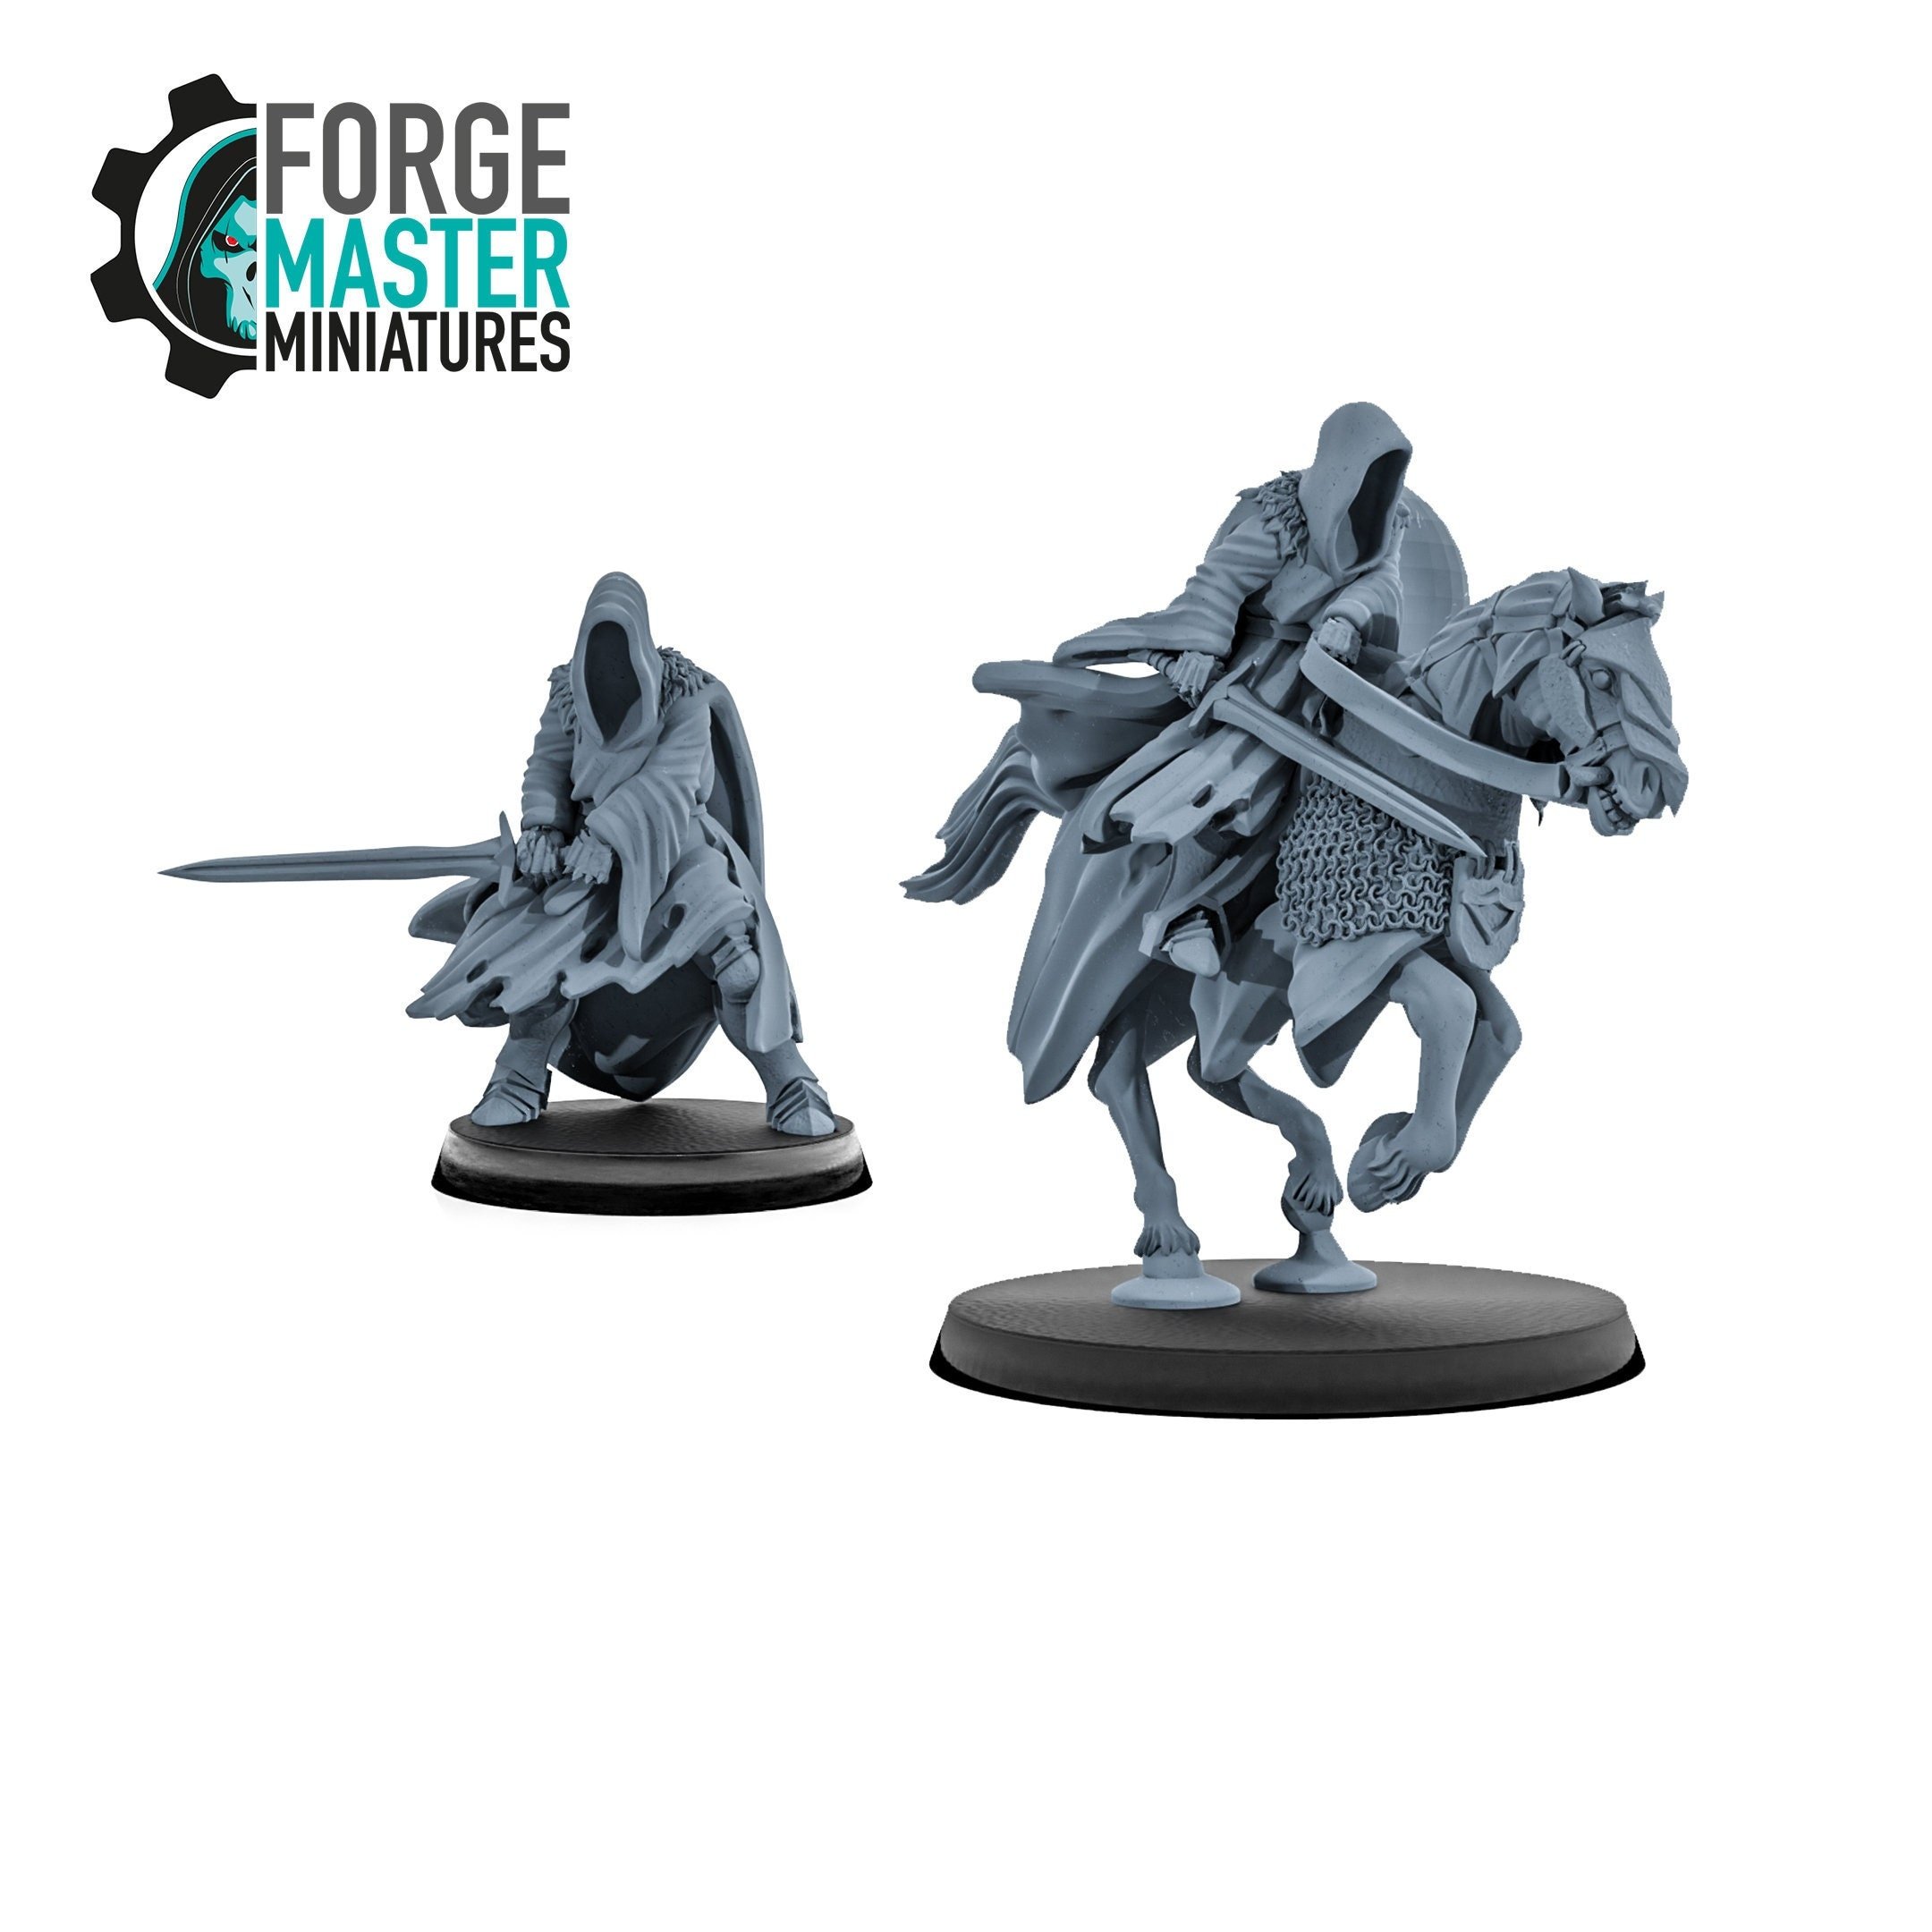 Lord of Terror Wriath wargaming miniatures by Kk Minis 3D Printed by Forgemaster Miniatures